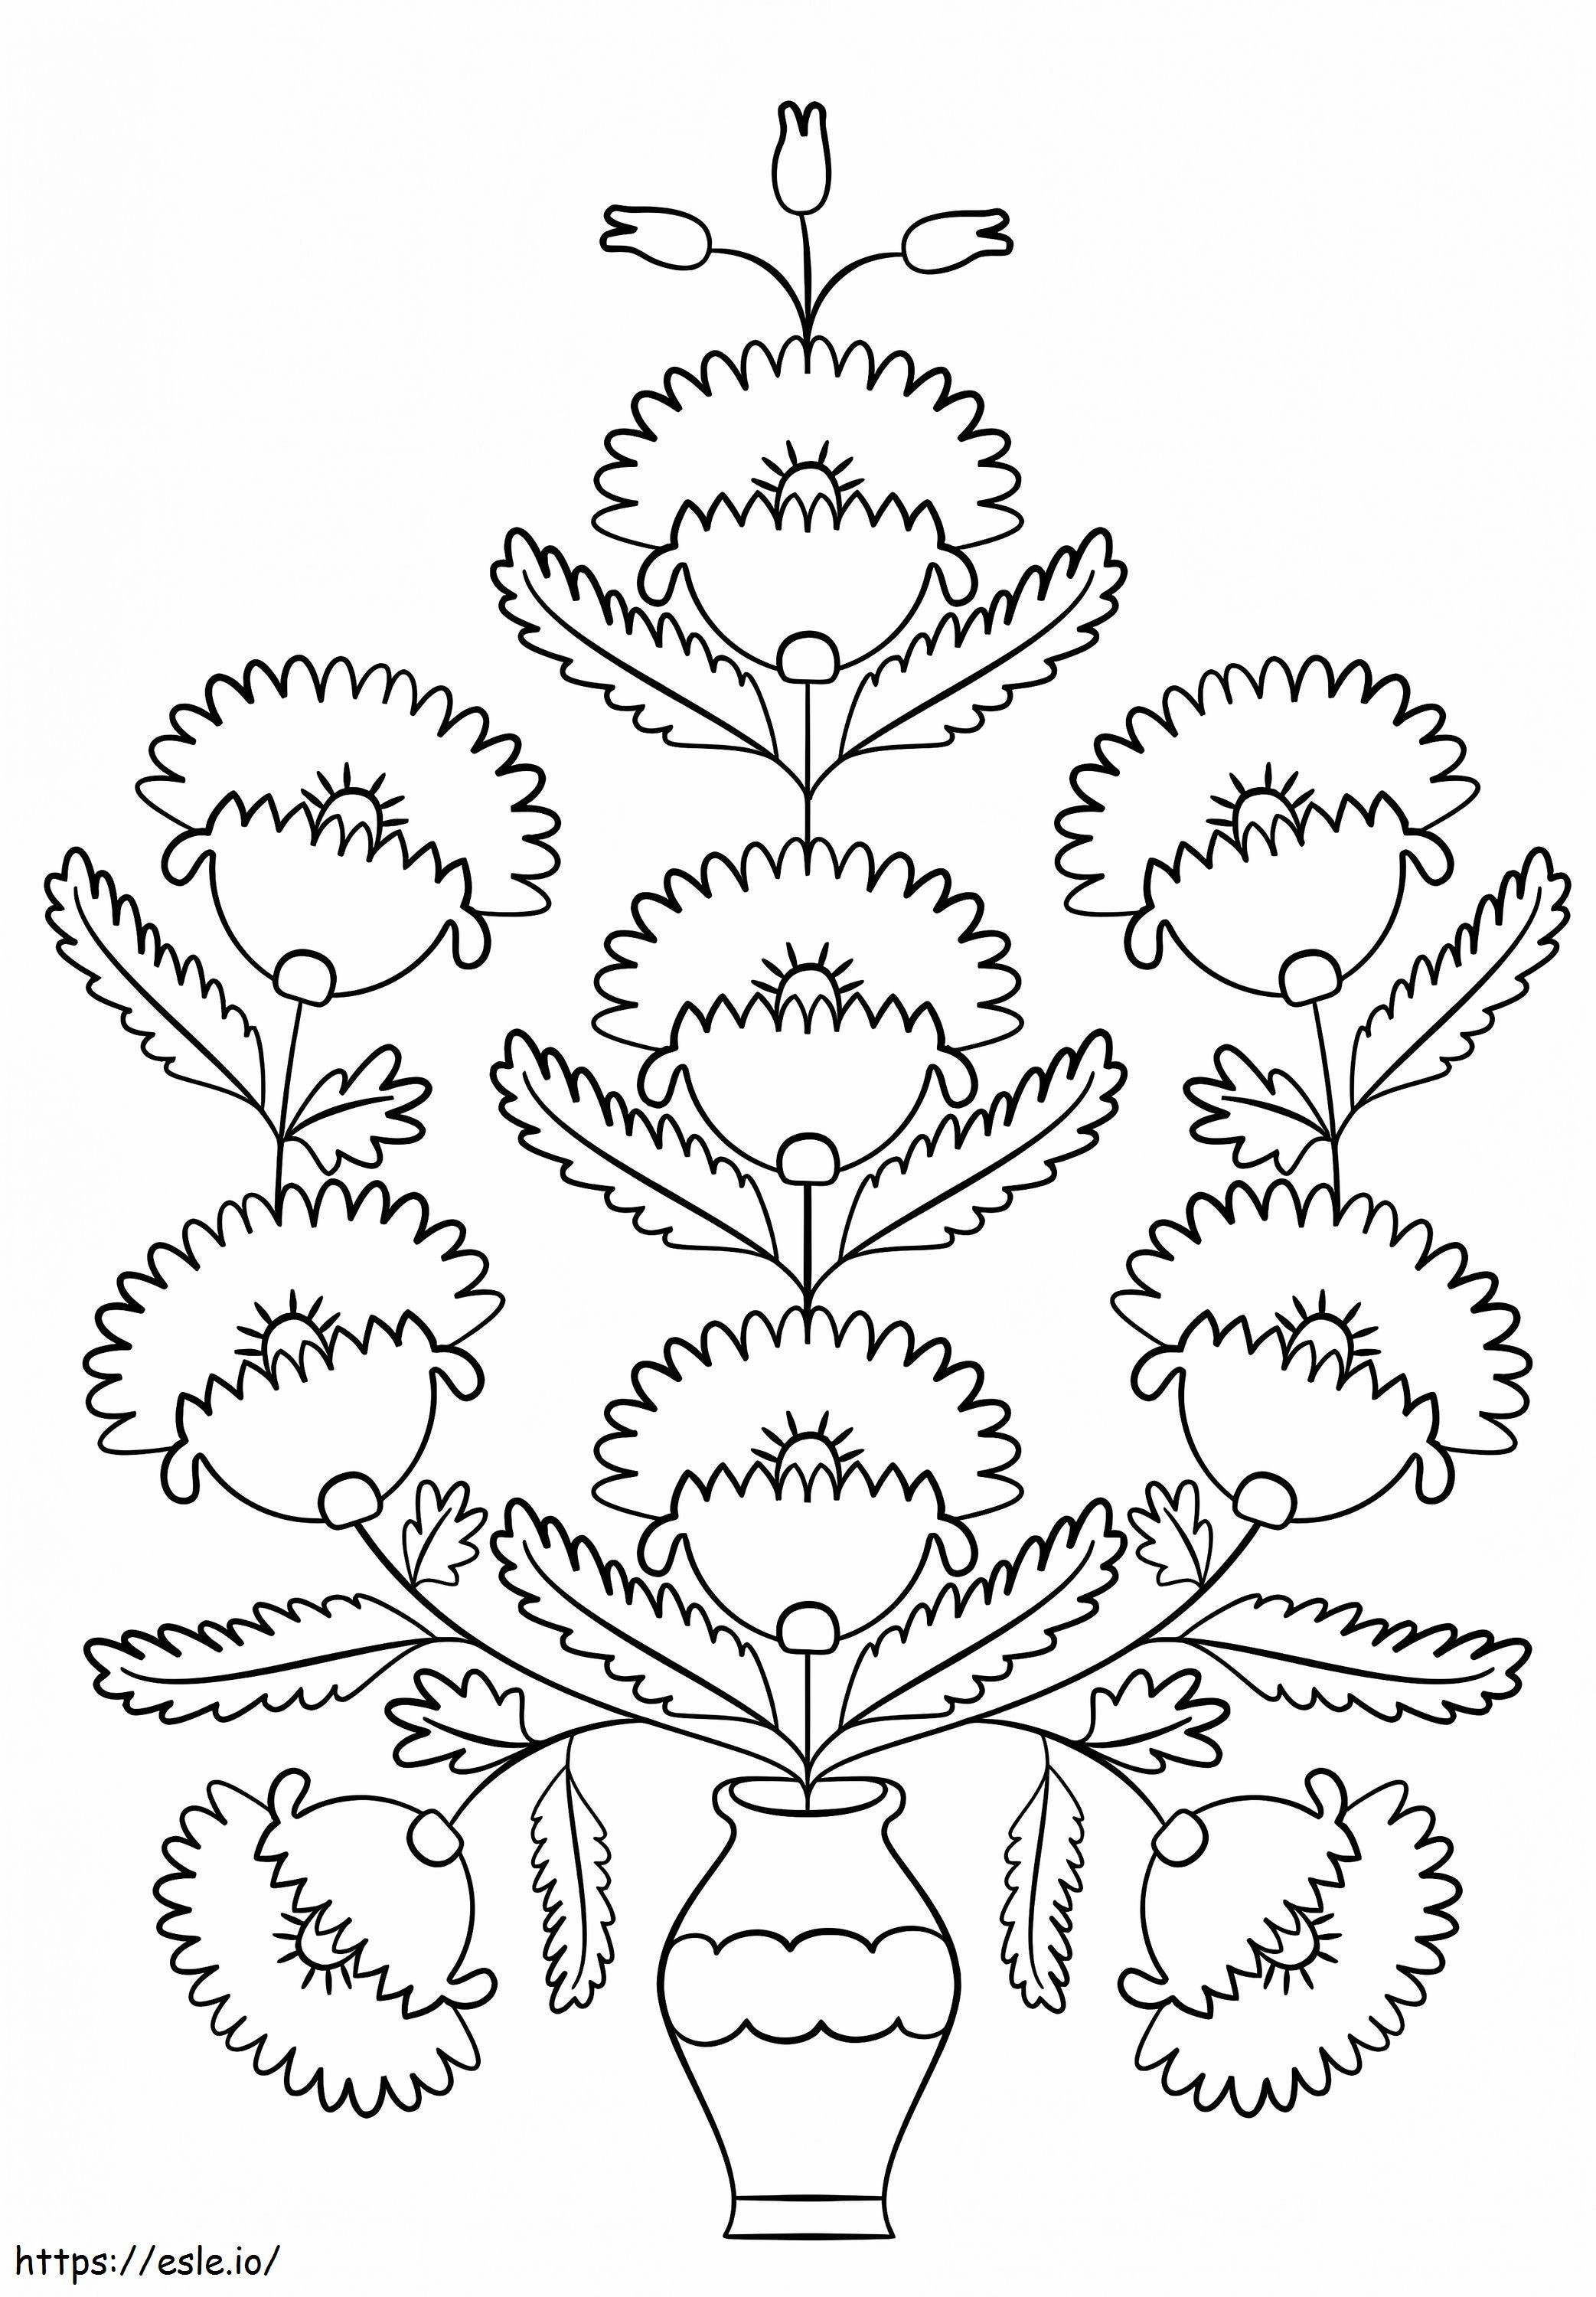 Poppy By Maria Prymachenko coloring page